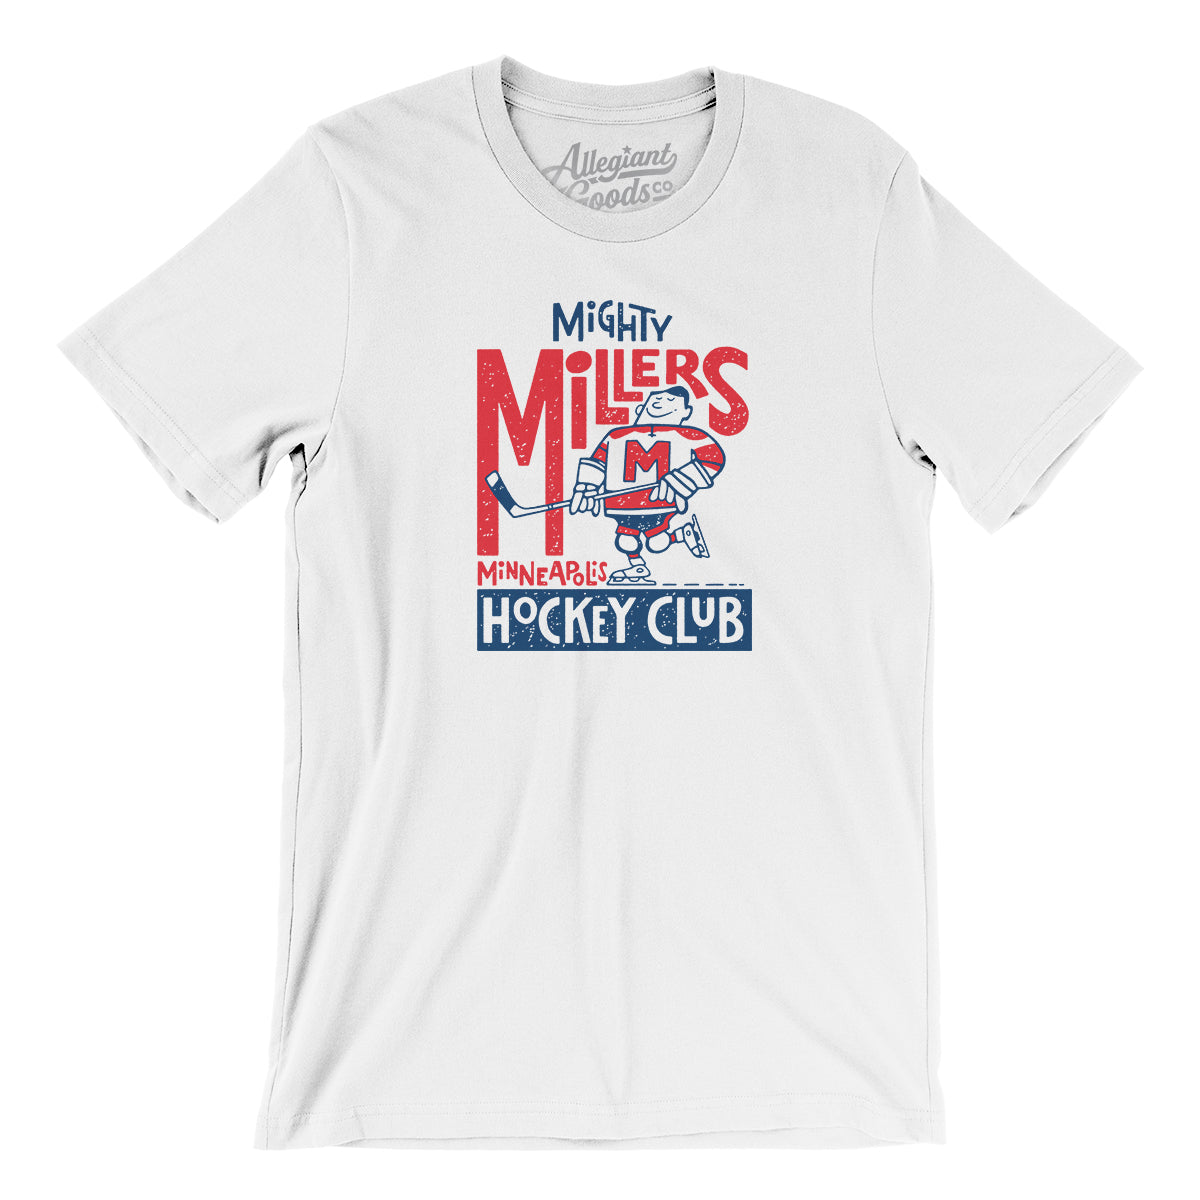 Vintage Ice Hockey Minneapolis Mighty Millers T-Shirt (Tri-Blend Super Light) Oatmeal Triblend / 2XL